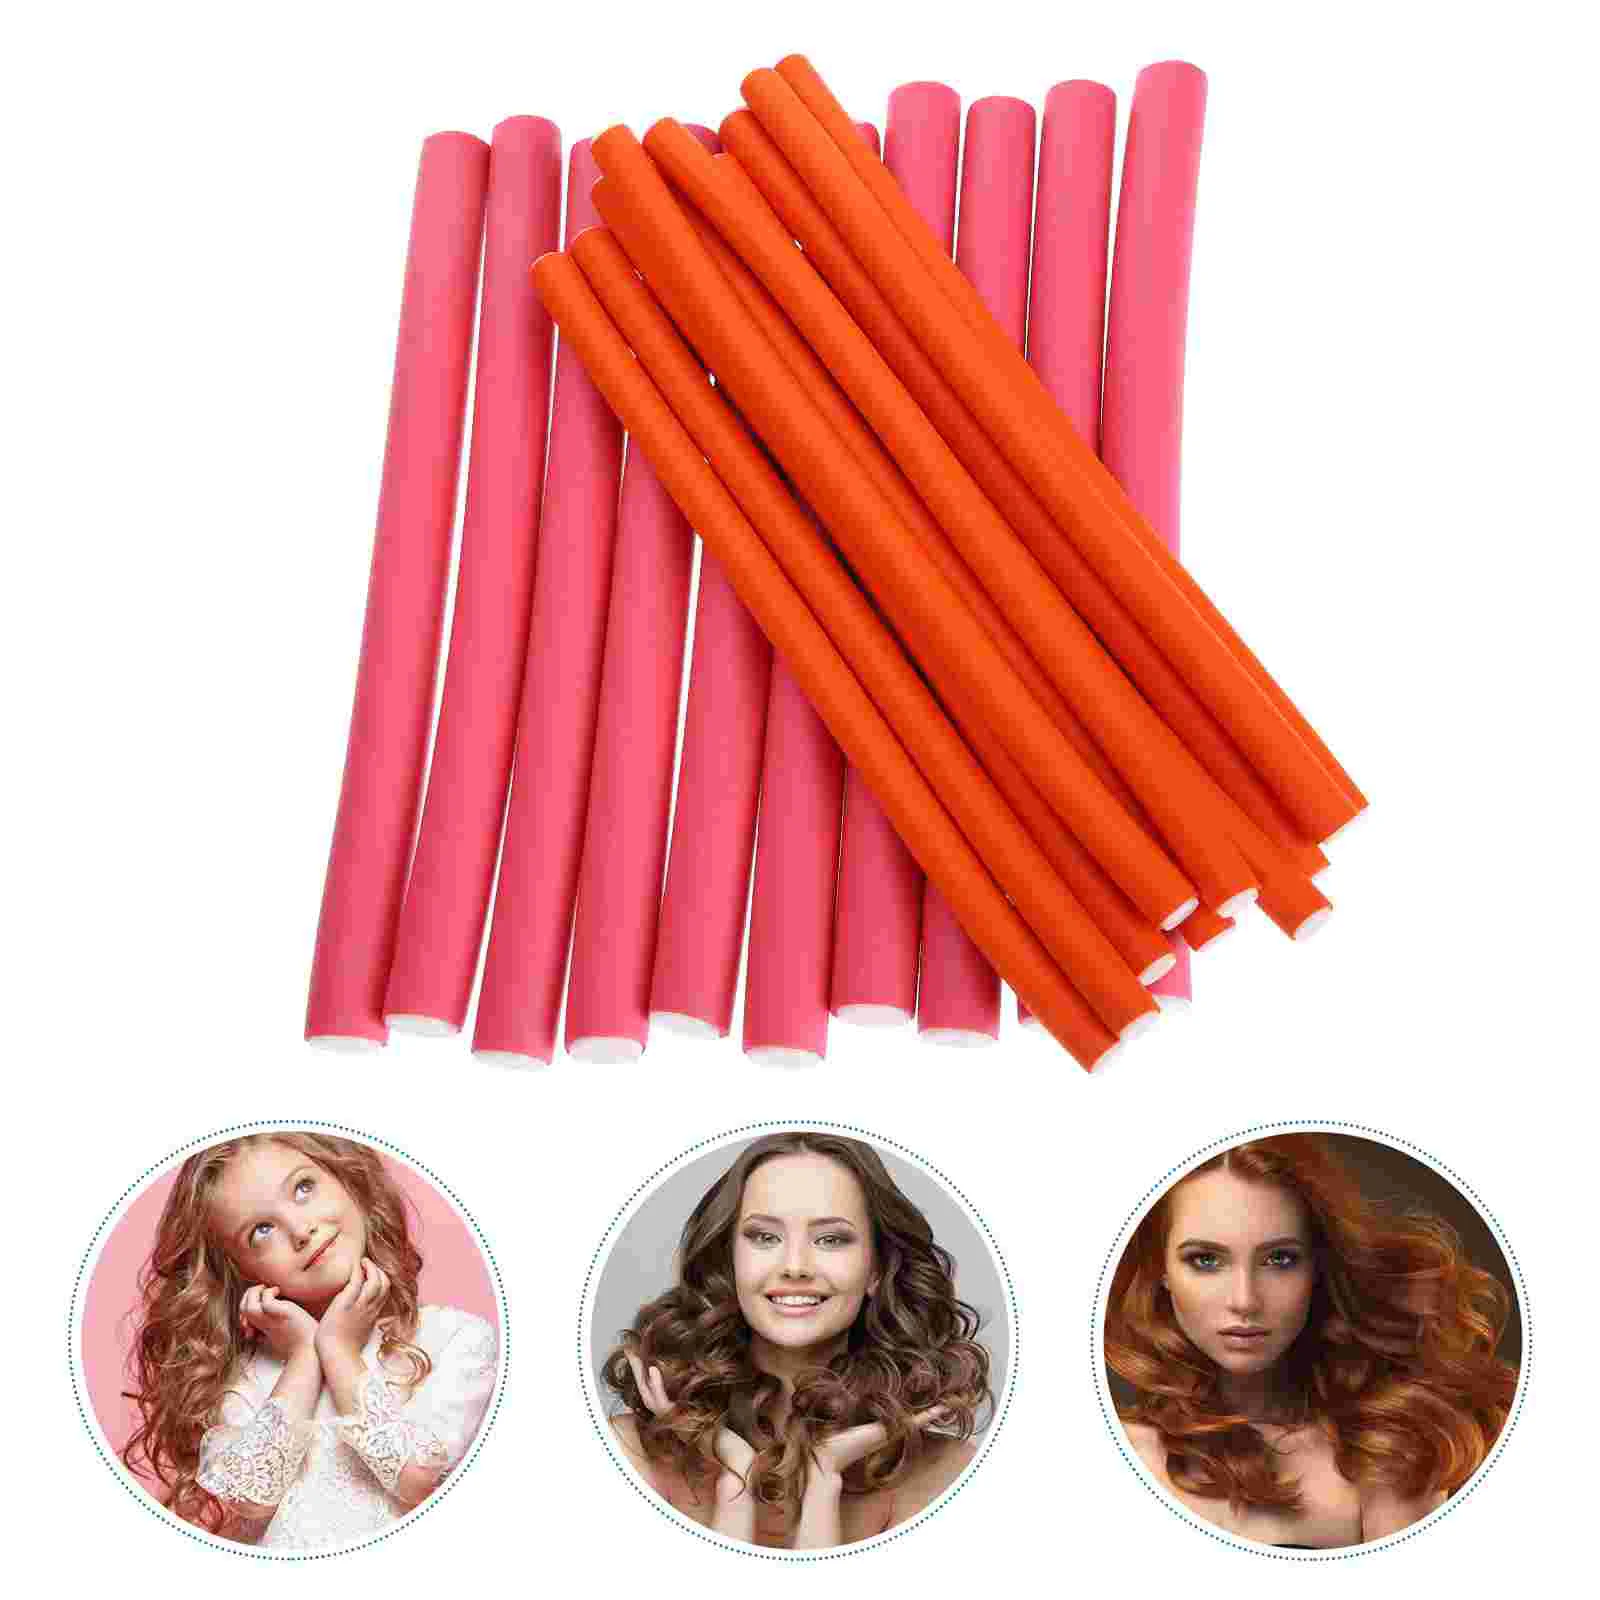 

Hair Short Curler Rollers No Curlers Heat Self Air Hairstyle Clips Holding Diy Bang Curling Curly Roller Grip Dressing Salon